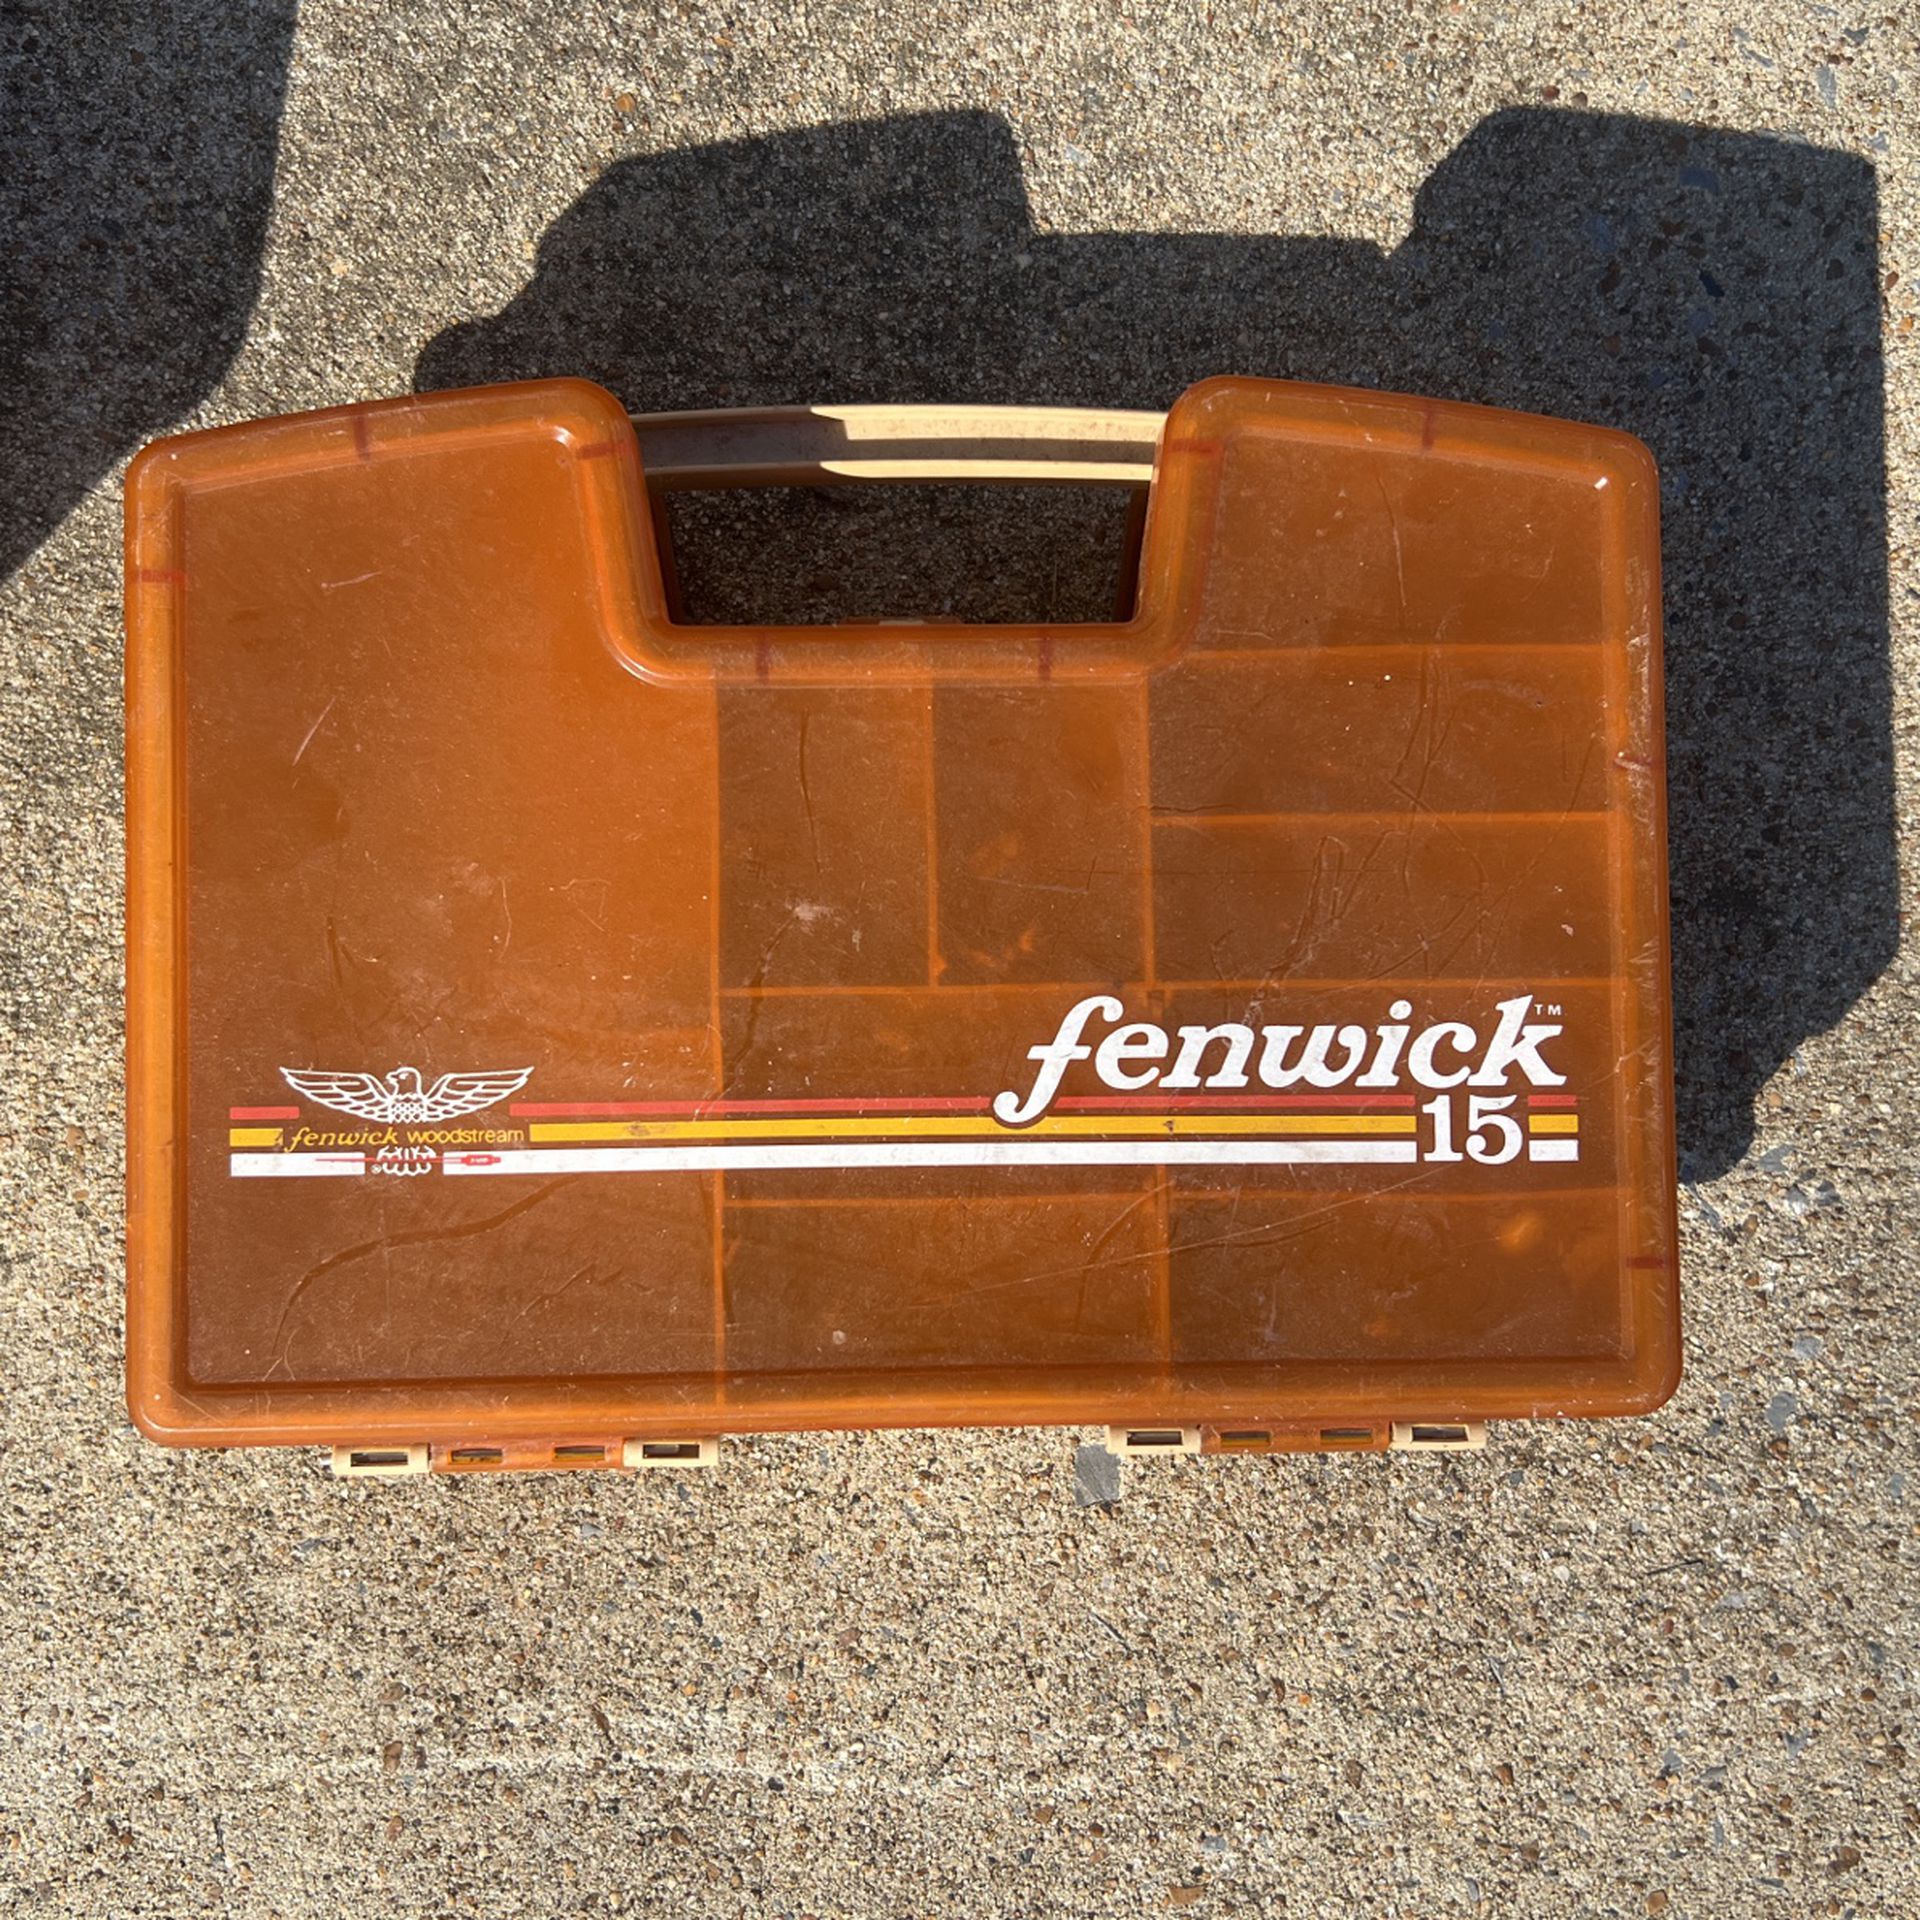 Vintage Fenwick 15 Tan & Orange Double Sided Compartmented Tackle Box